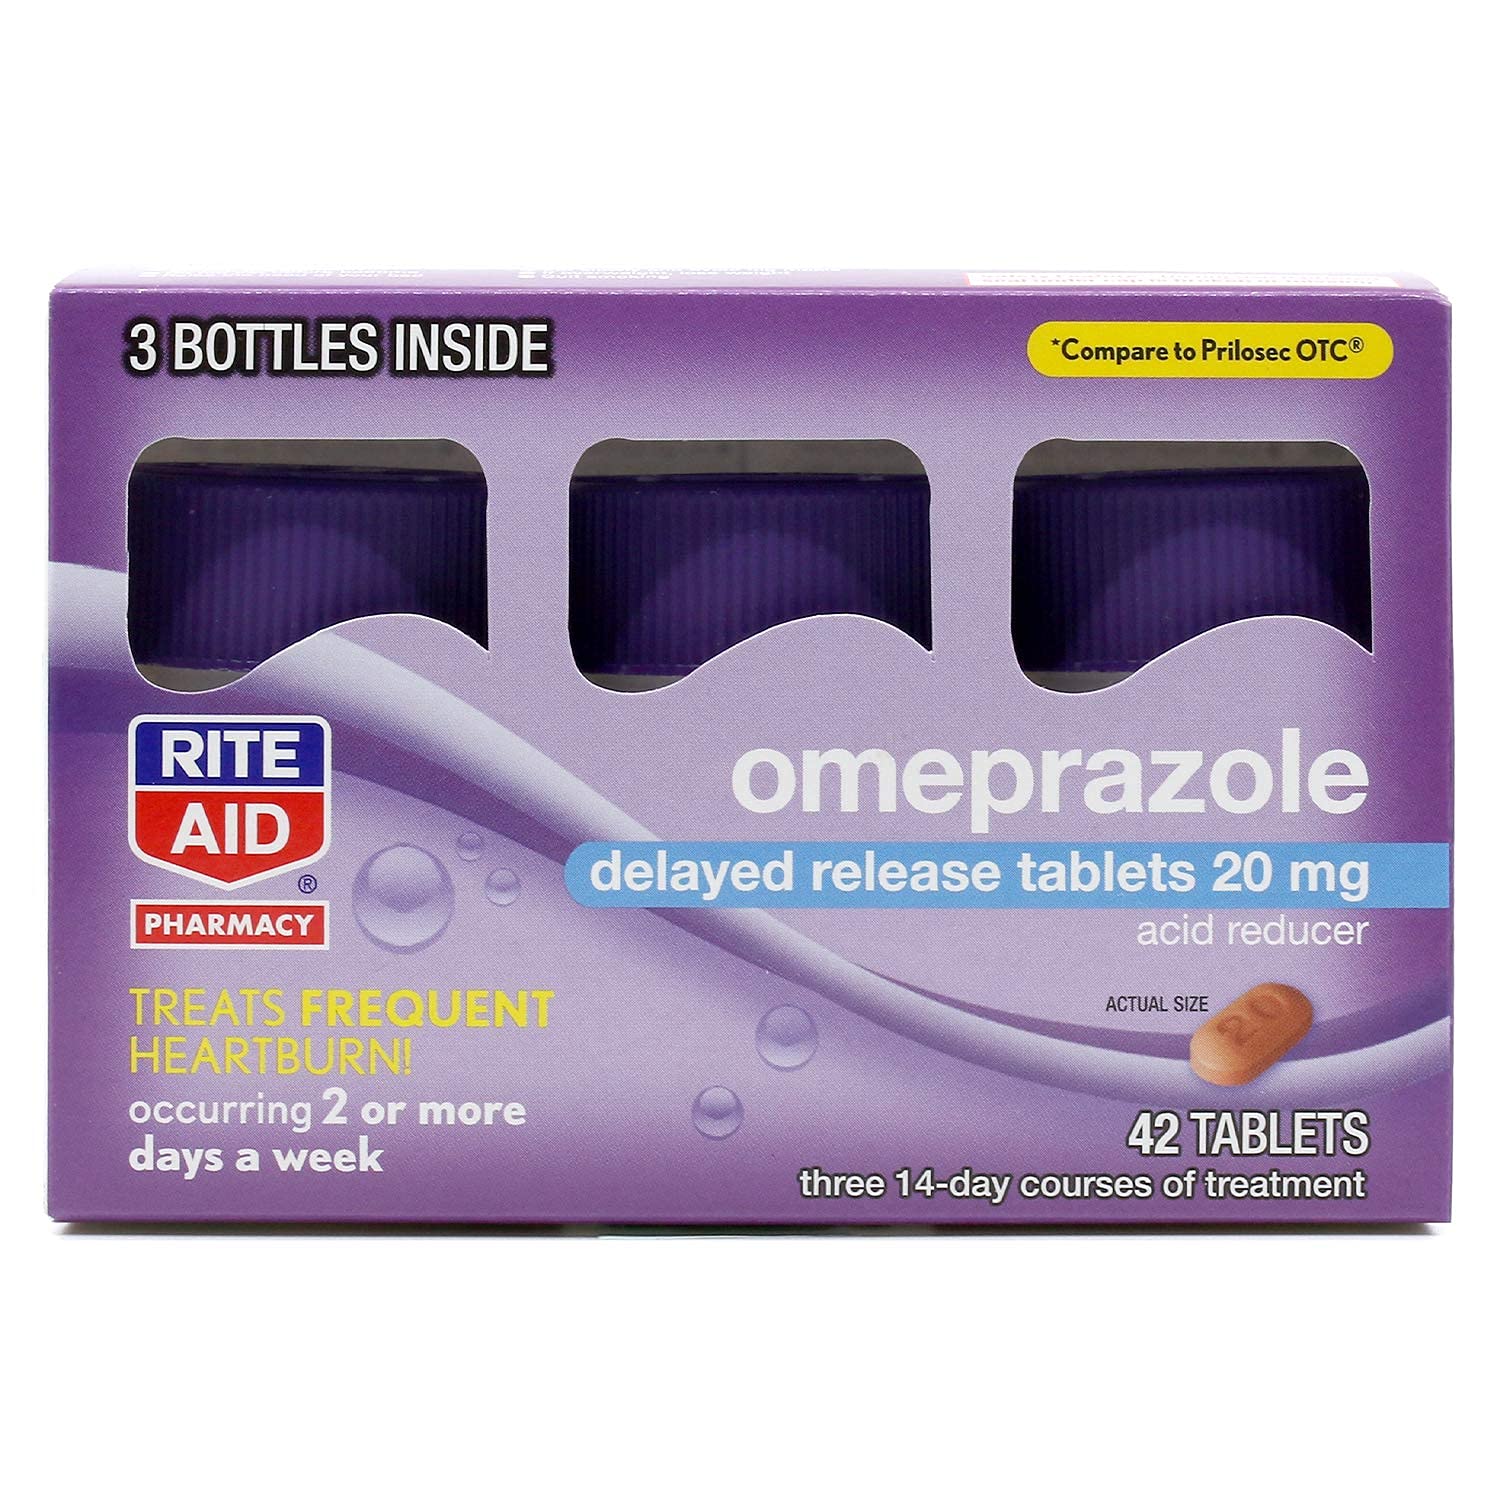 Rite Aid Acid Reducer Omeprazole Delayed Release Tablets - 20 mg, 3 Bottles, 14 Count Each (42 Count Total) - Heartburn Relief - Heartburn Medicine - Treats Frequent Heartburn